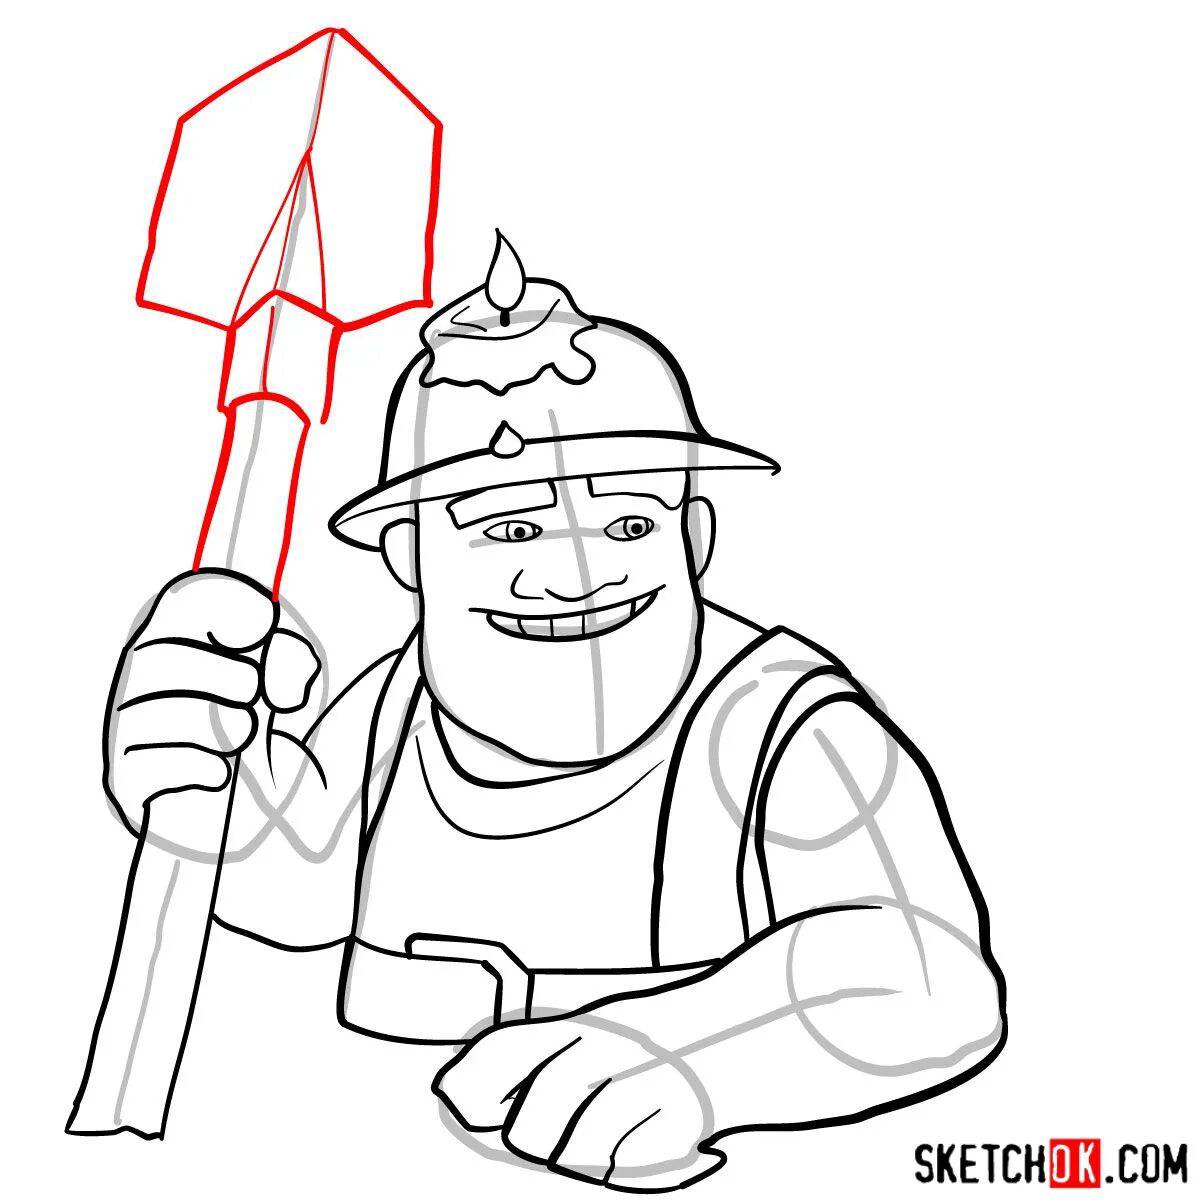 Miner coloring book for kids